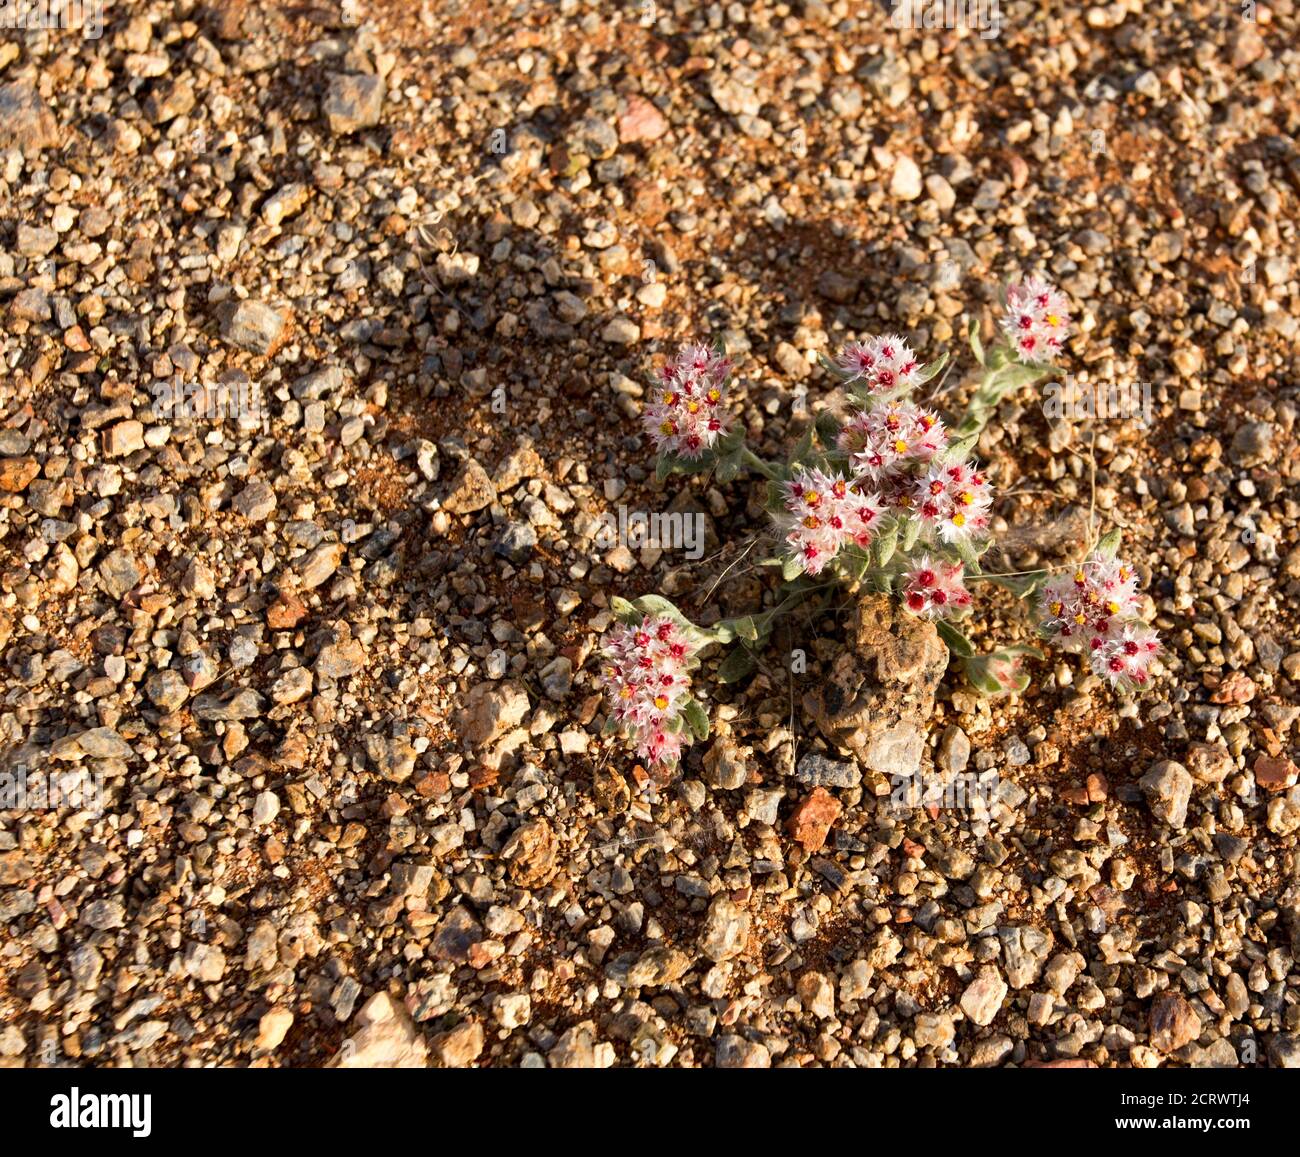 A small plant with flowers in Namibia desert Stock Photo